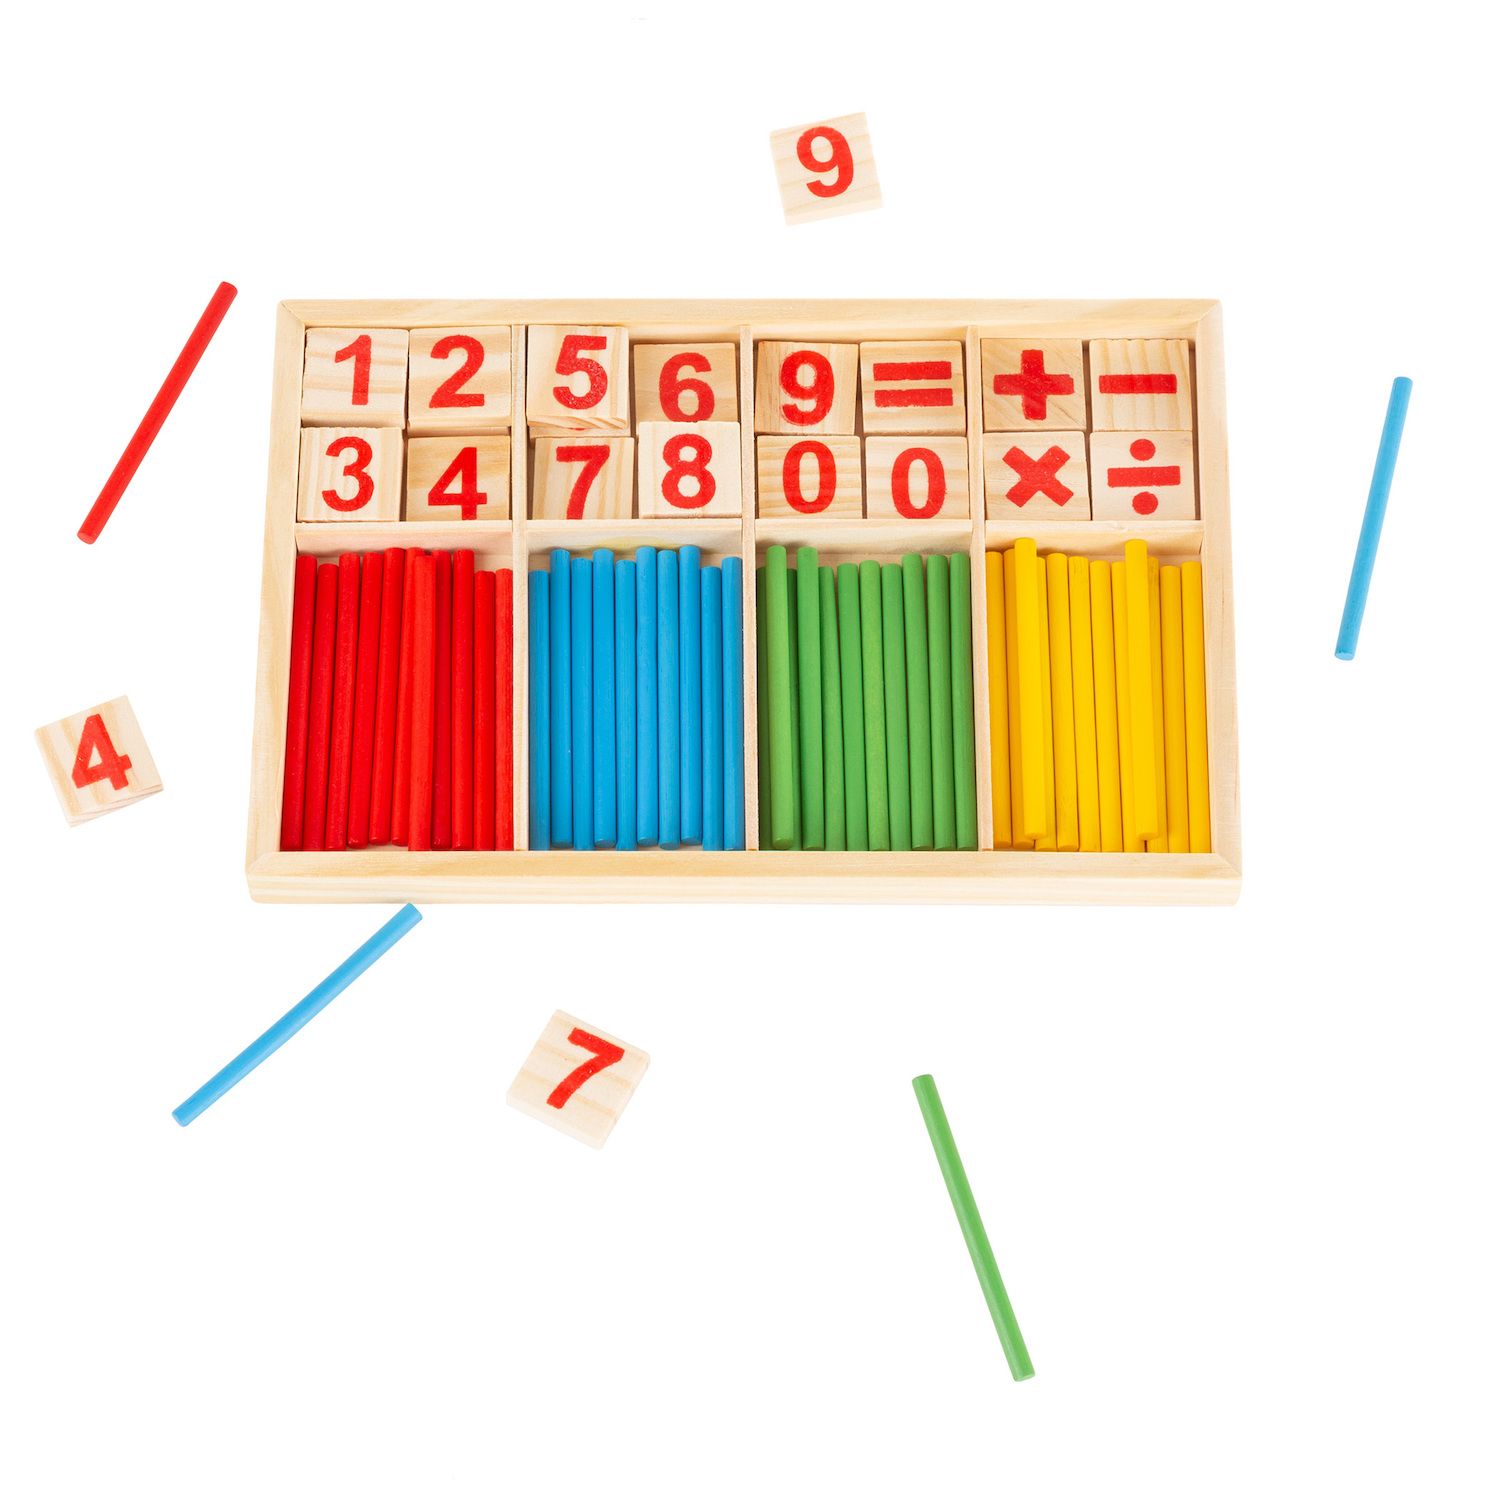 Image for Hey! Play! Montessori Math Manipulatives - Number Tiles and Colorful Sticks to Count, Add, Subtract, Multiply and Divide at Kohl's.